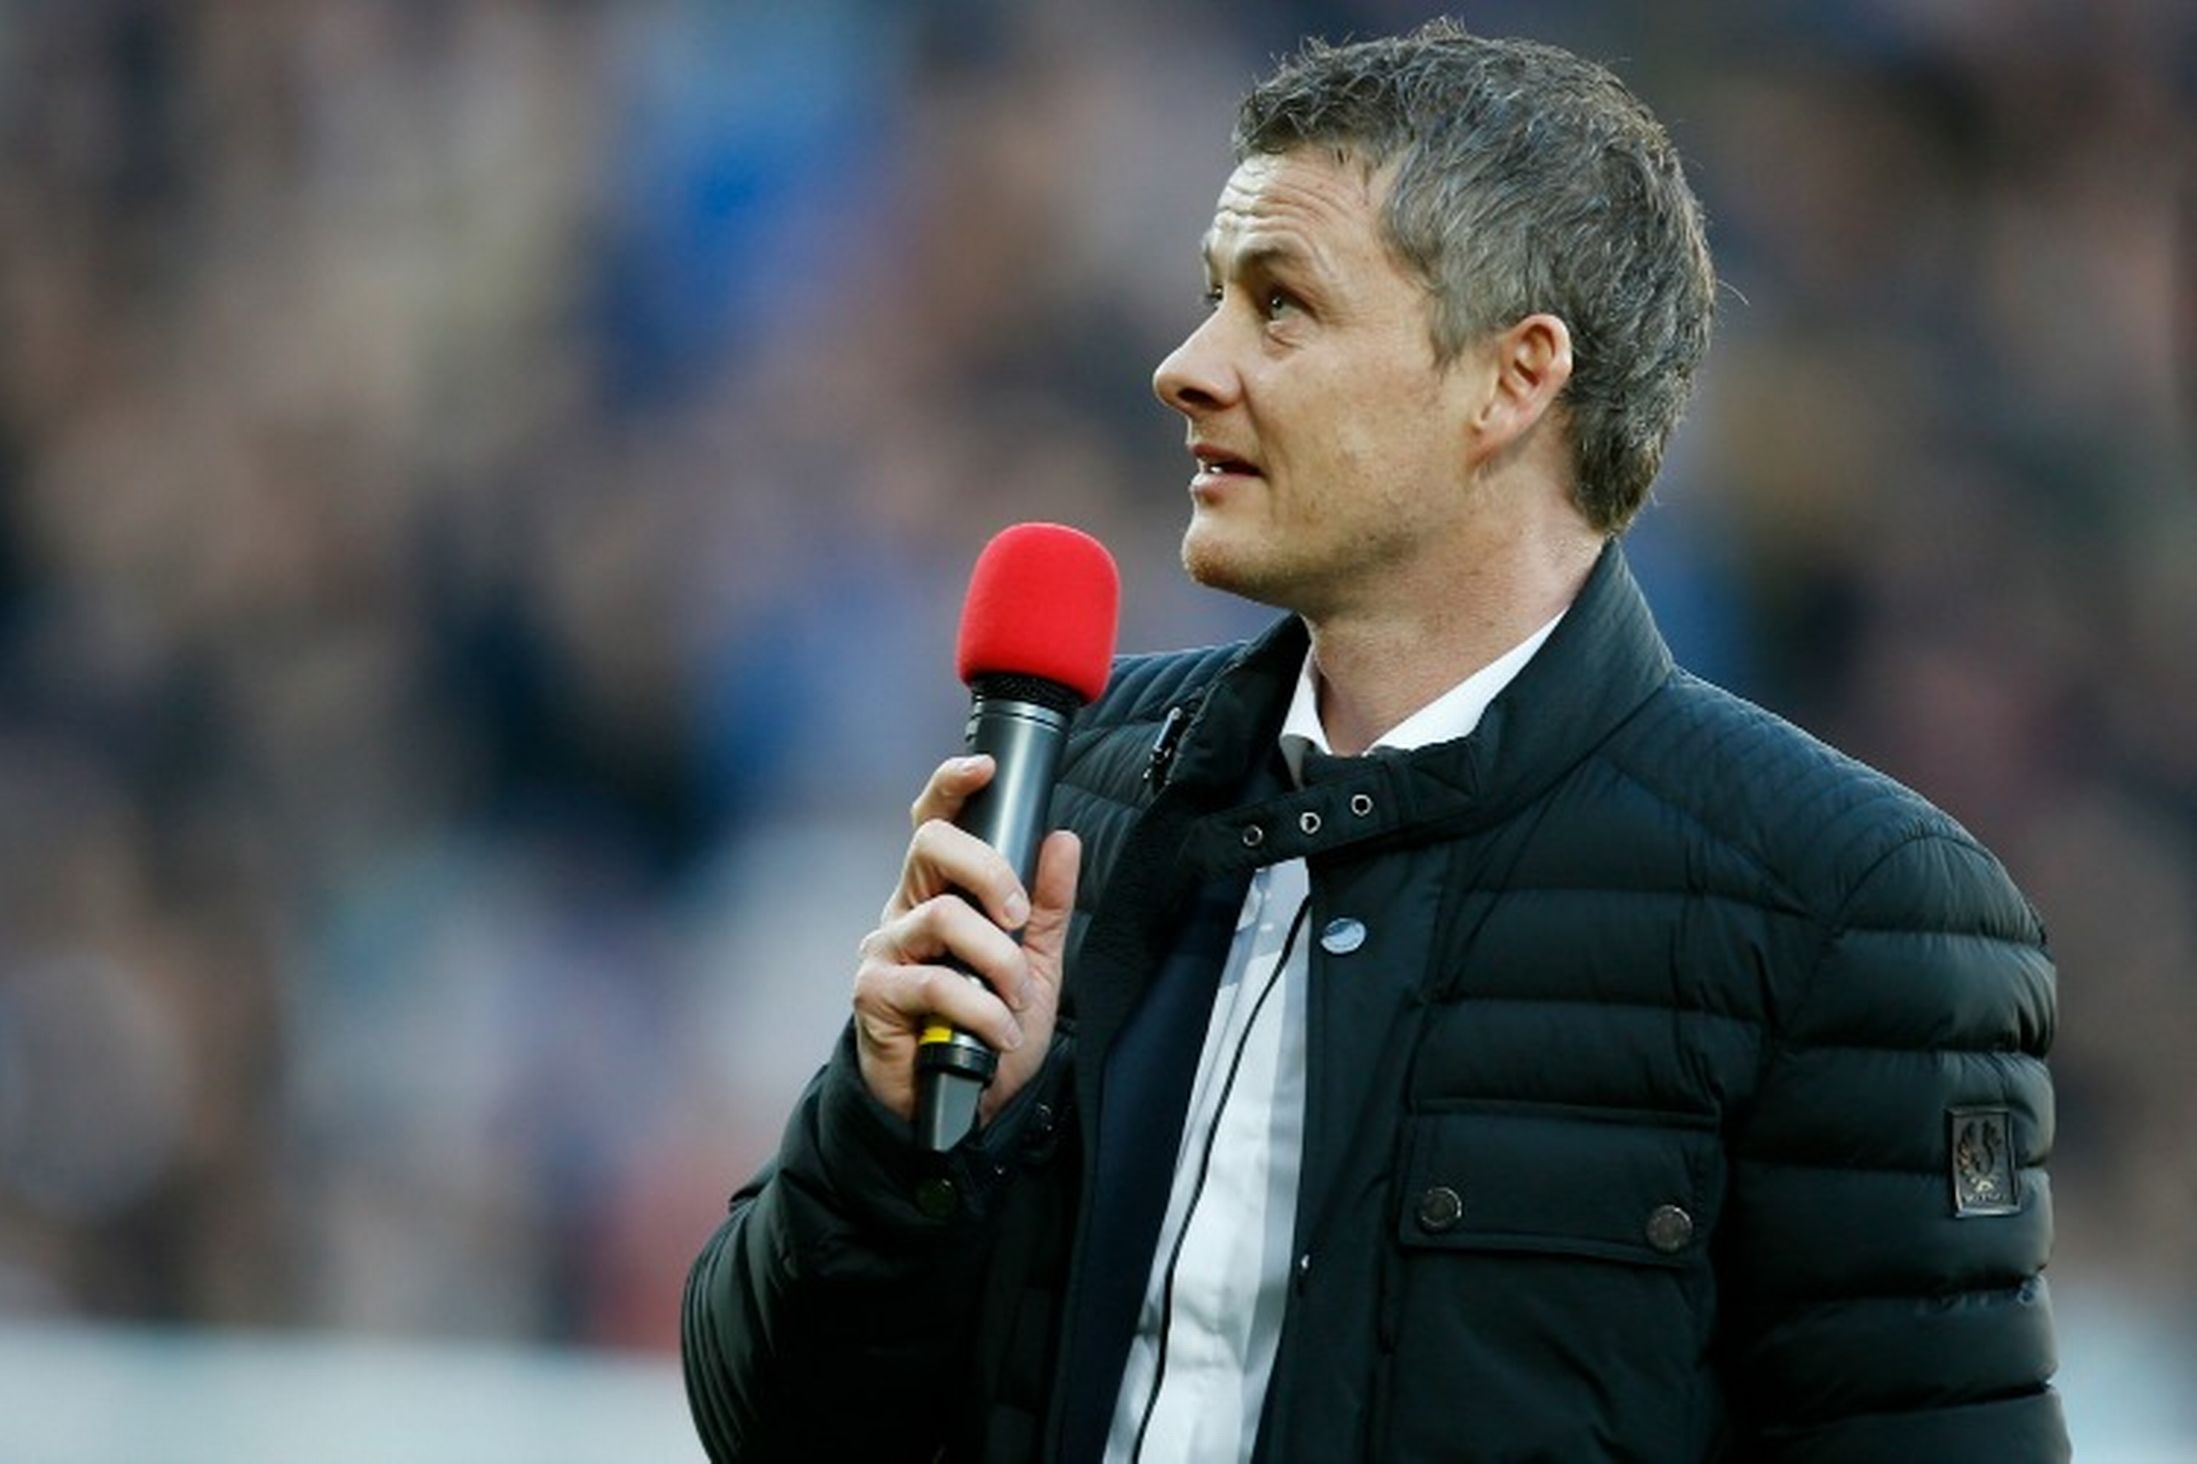 Ole Gunnar Solskjær addresses the crowd before his first home game in charge - it didn't have the desired effect!*